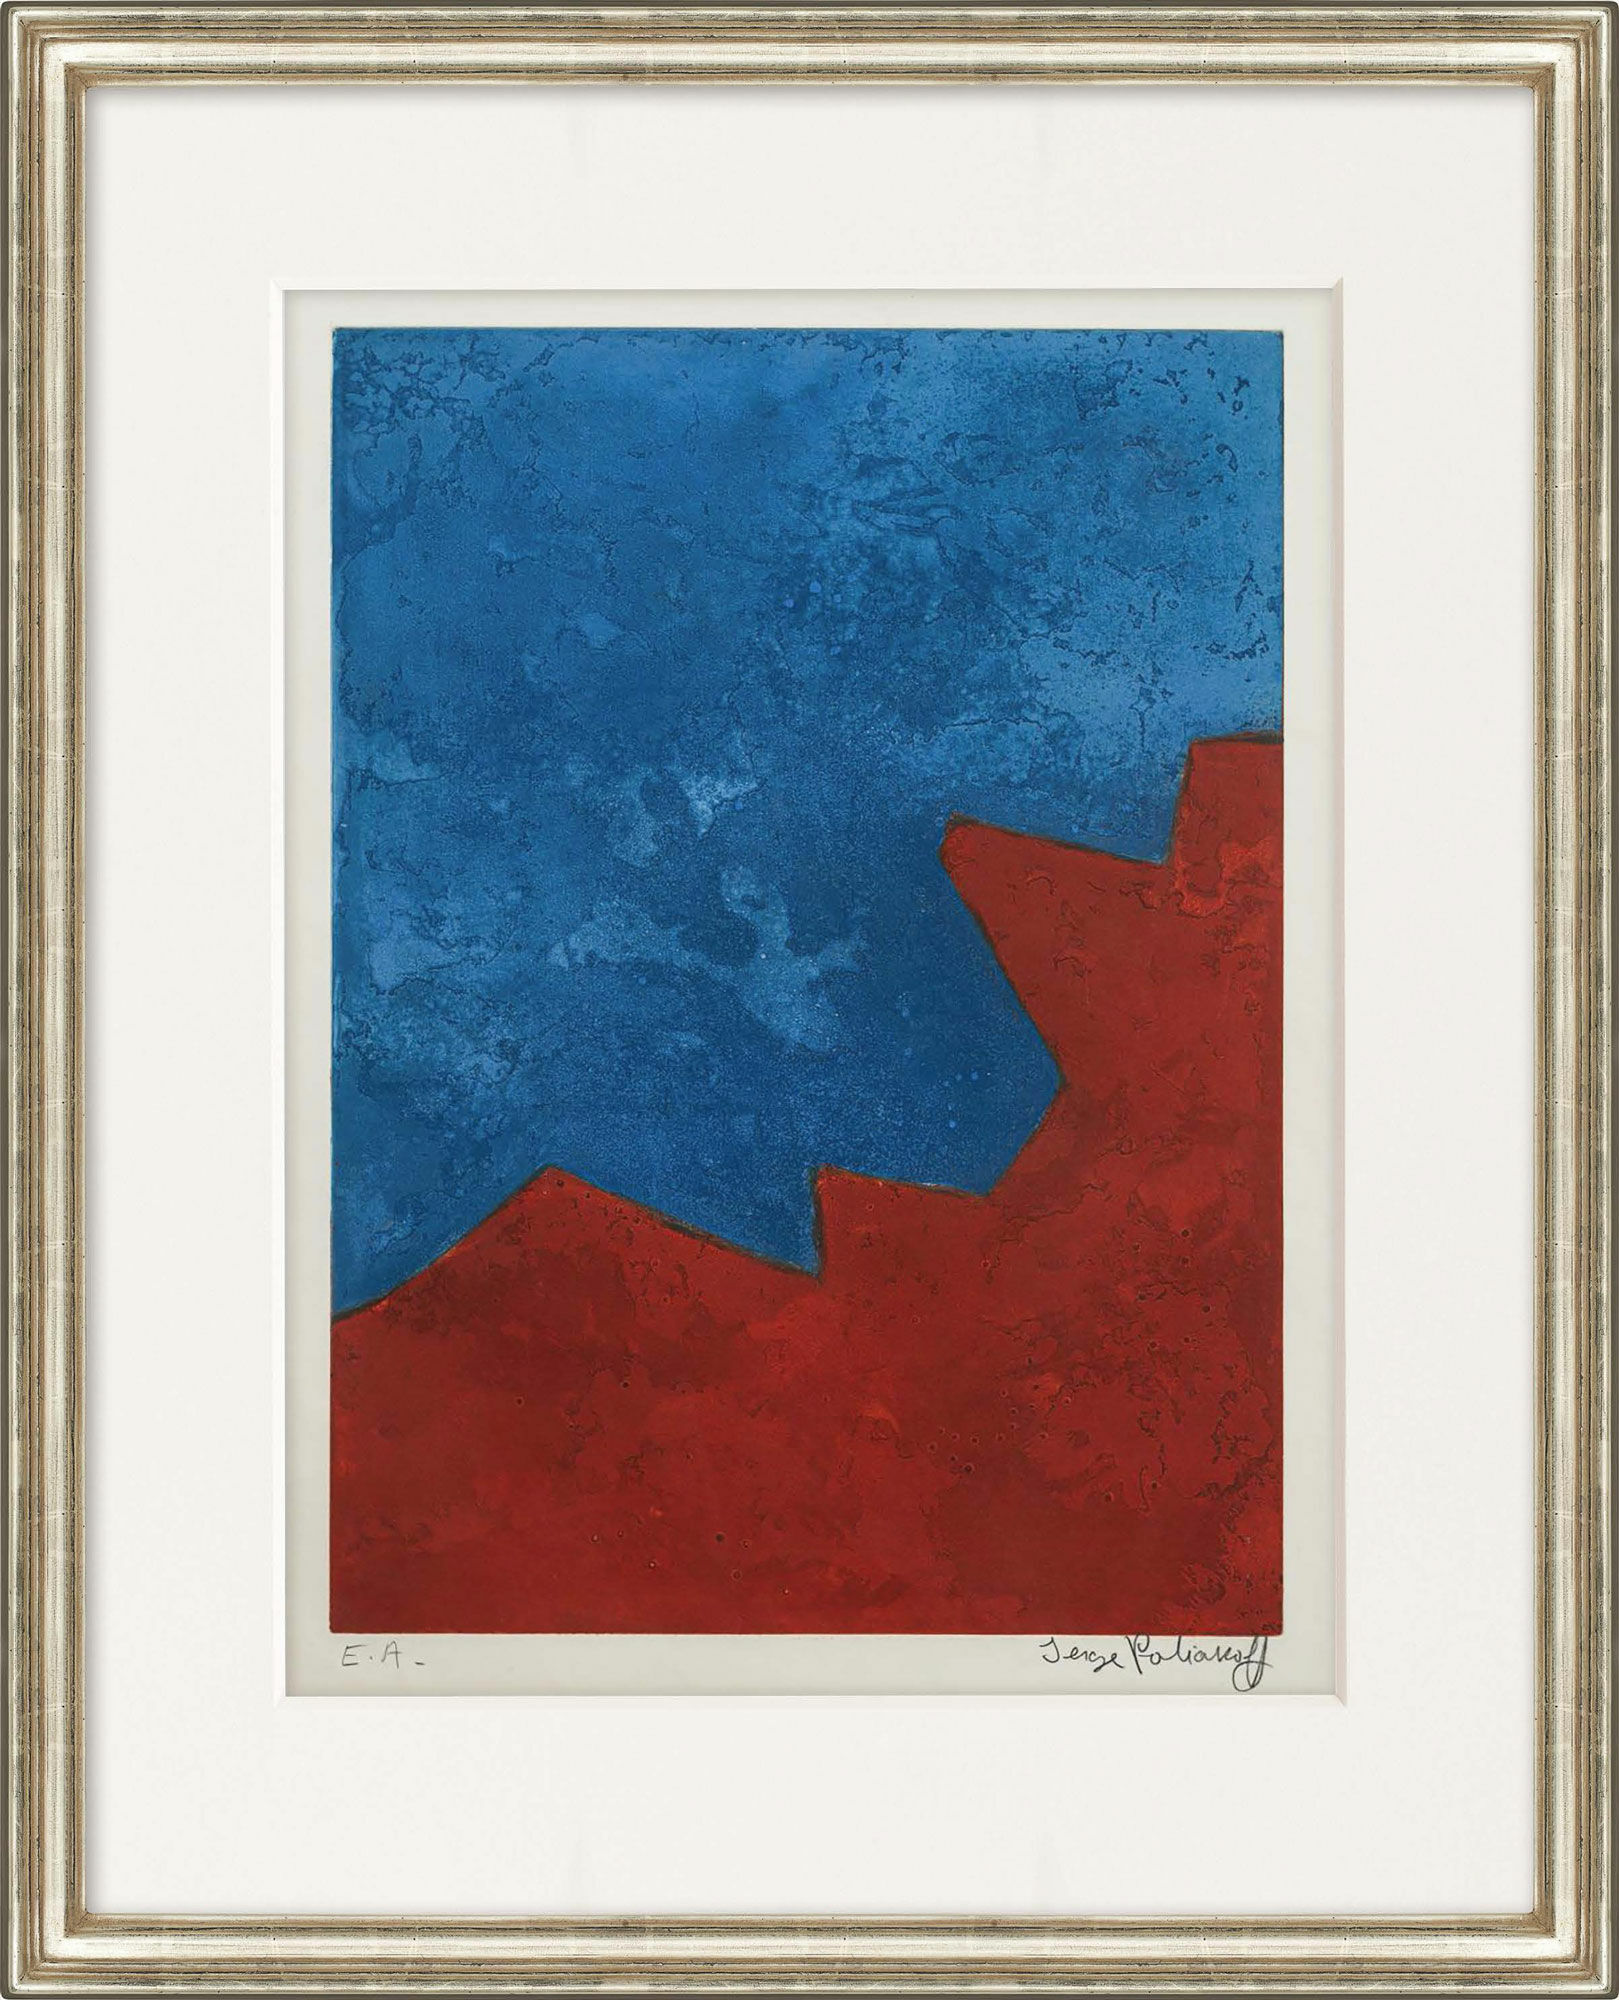 Picture "Composition in Red and Blue" (1967) by Serge Poliakoff